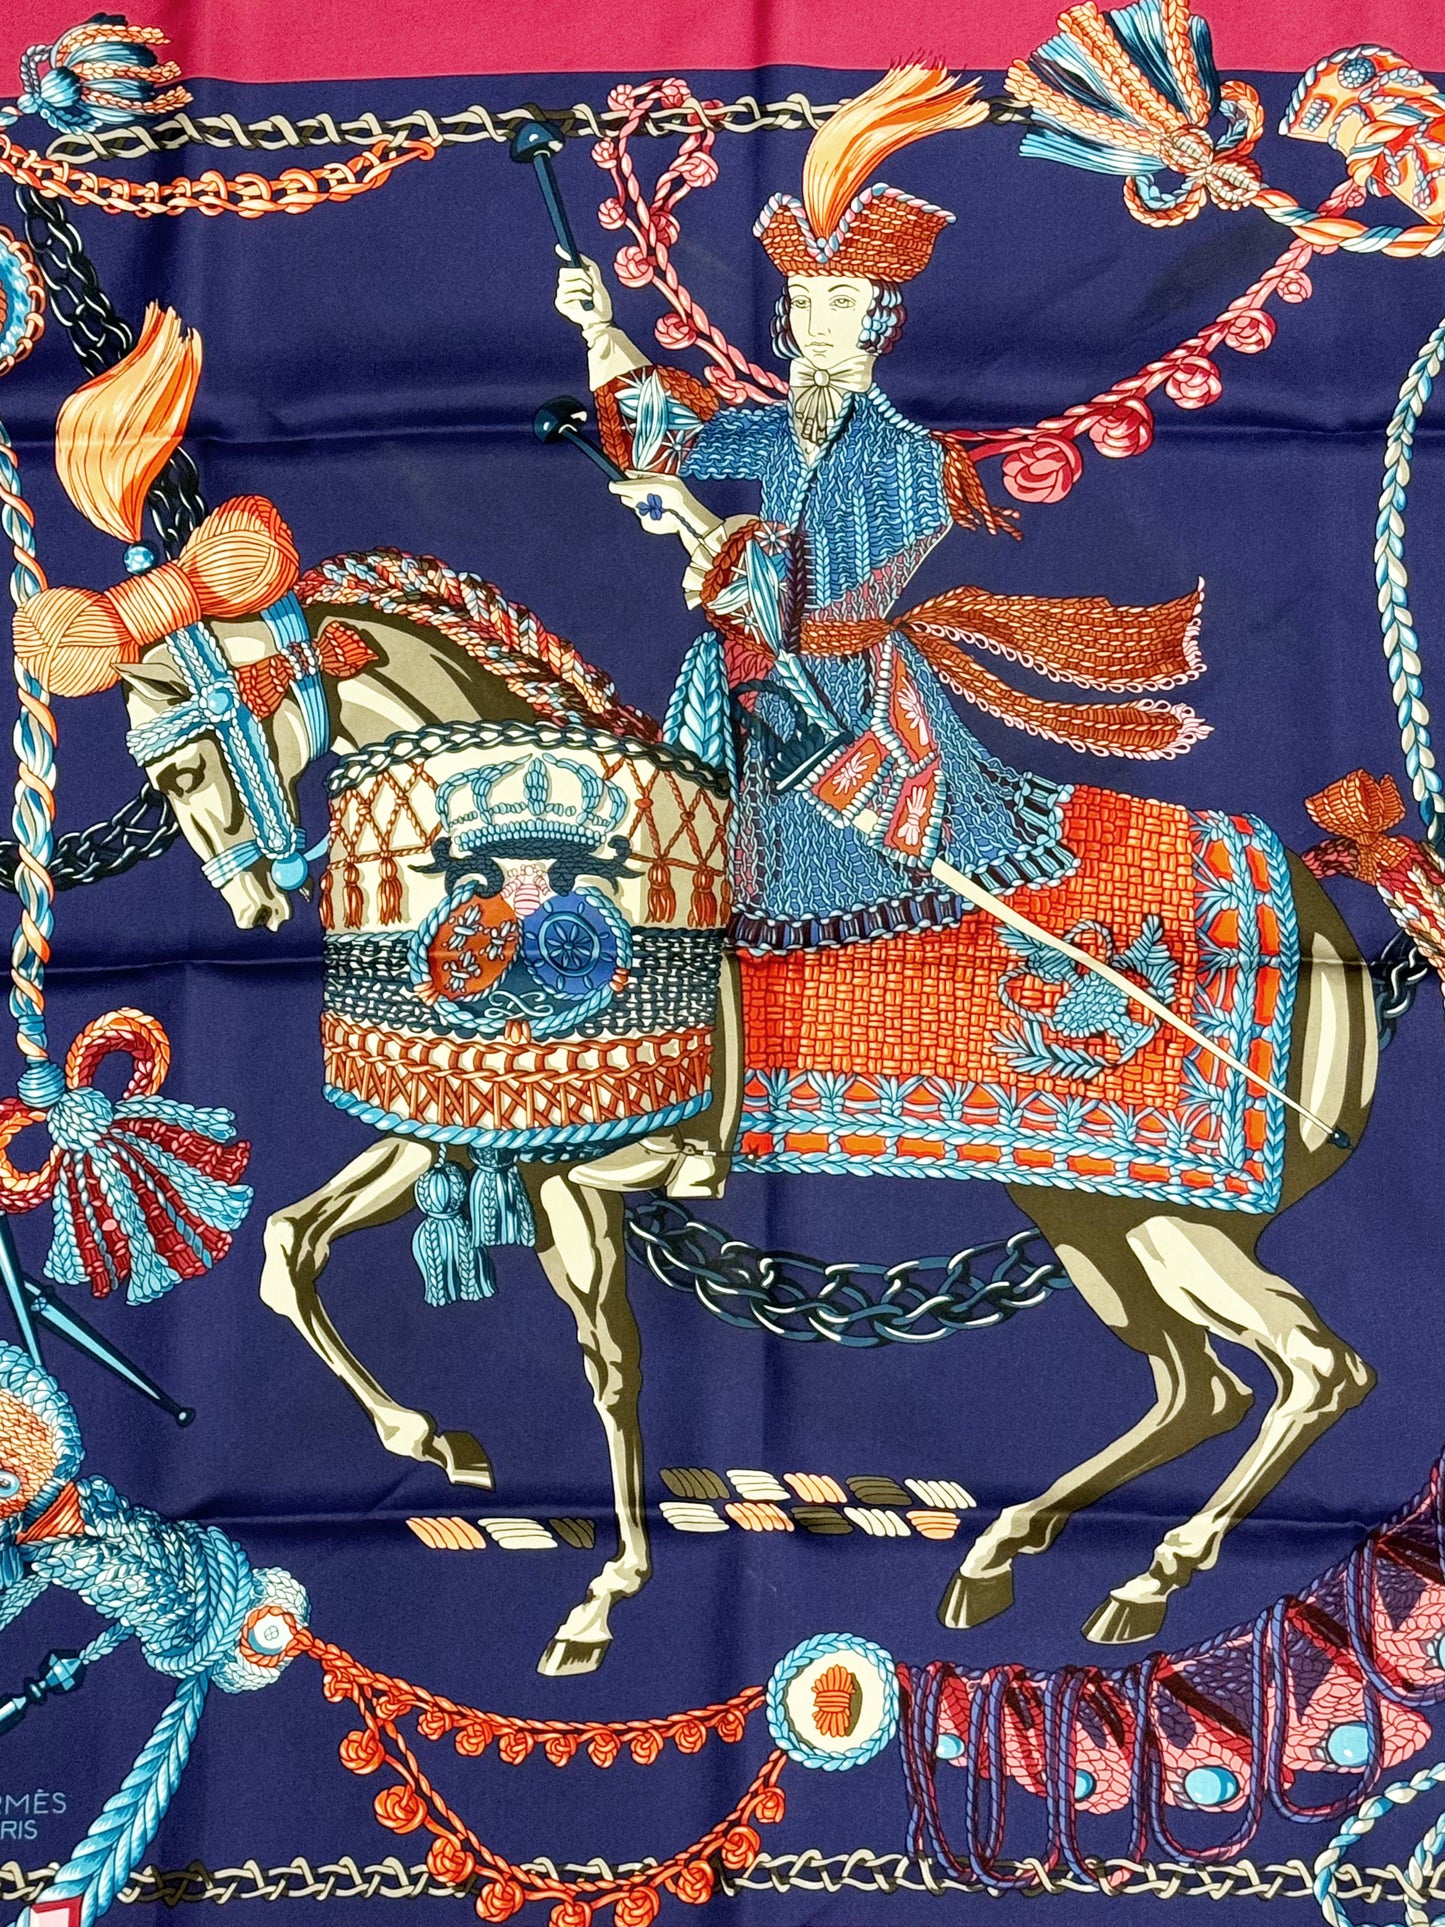 Hermès "Le Timbalier" Silk Scarf